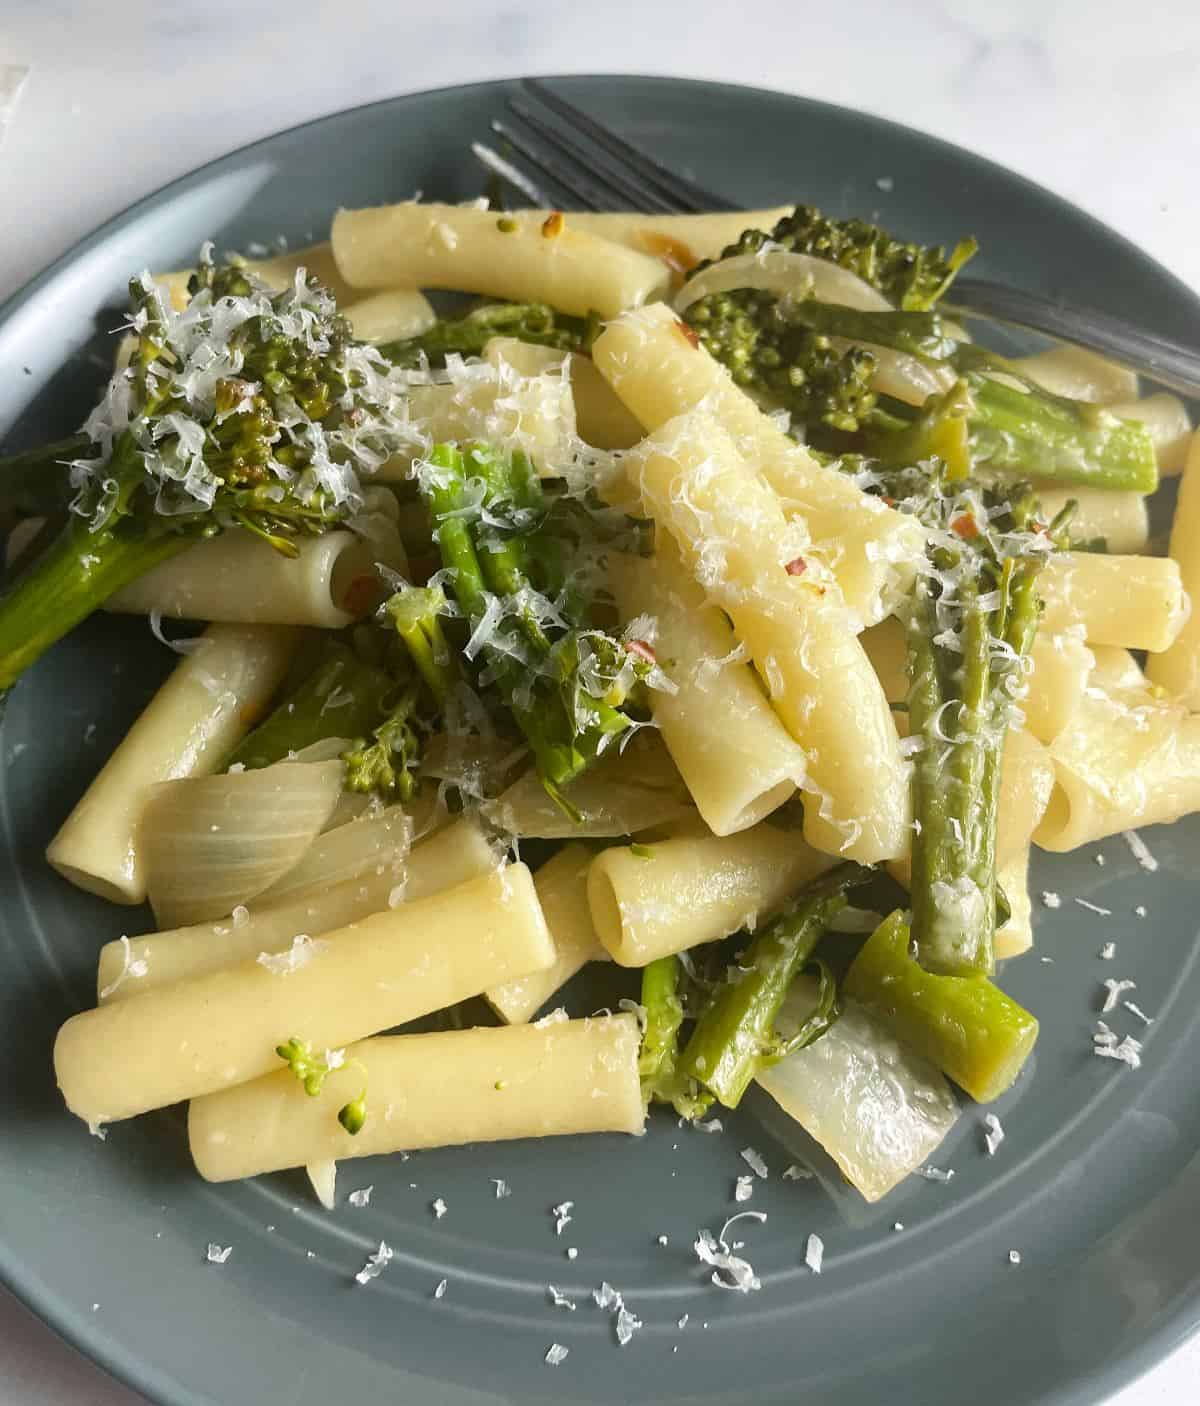 Broccolini tossed with ziti and shredded Parmesan cheese, on a dark gray dish.